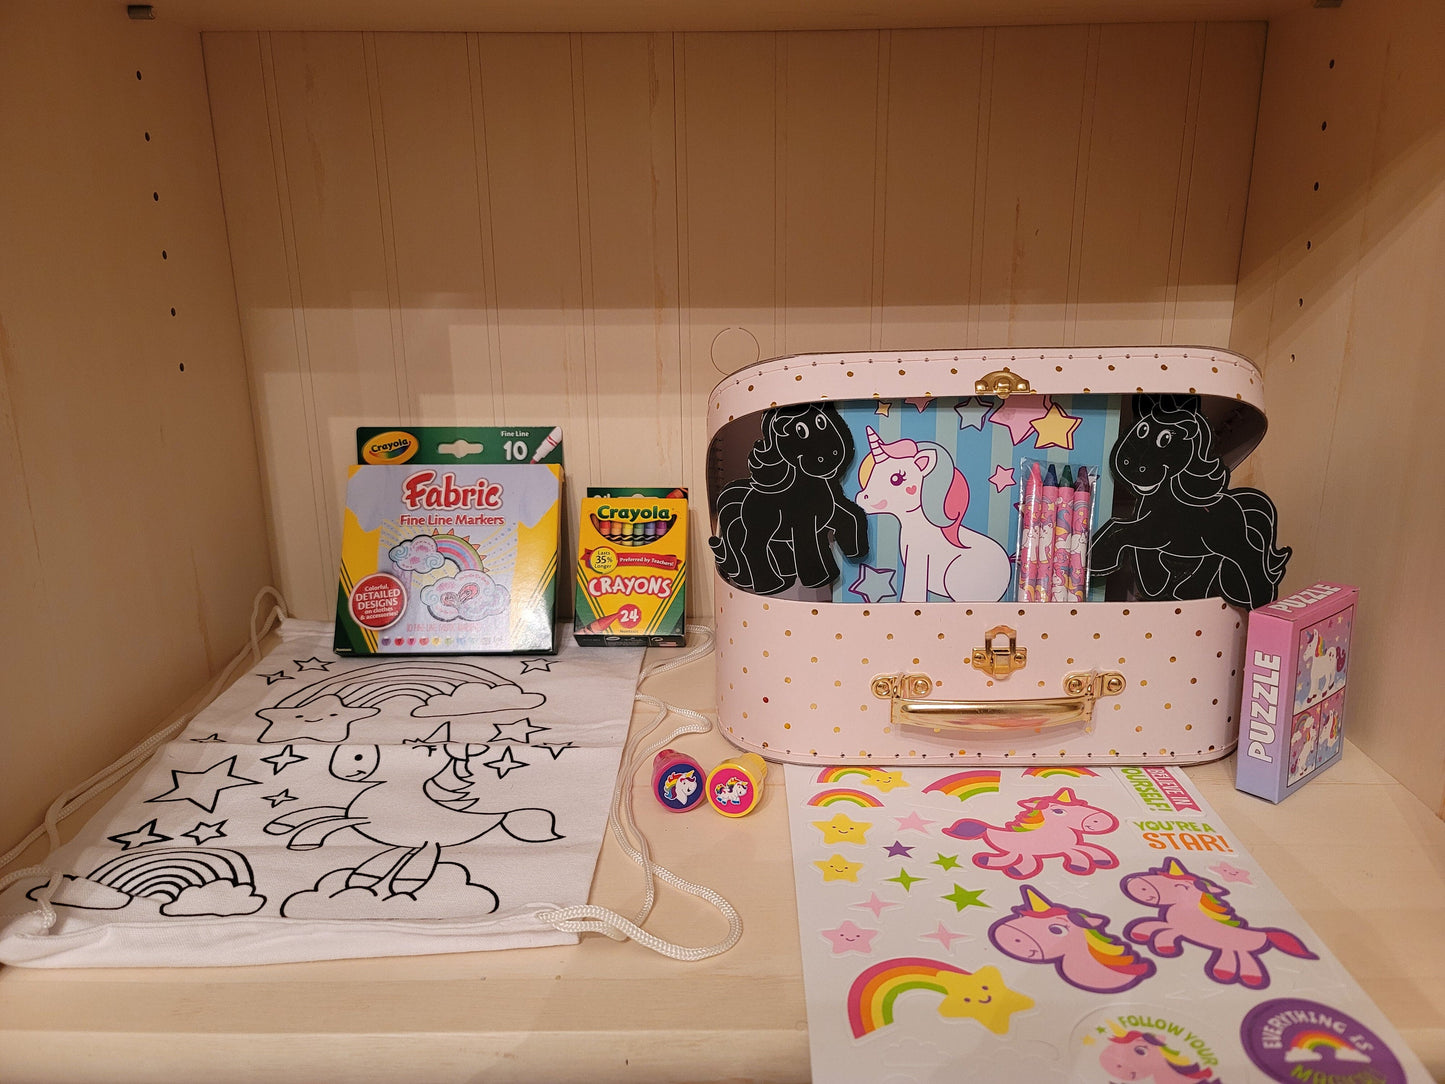 UNICORN Themed Kid Activity Set - Arts & Crafts, Games, and Activities for recommended ages 3 - 10 with reusable gift box